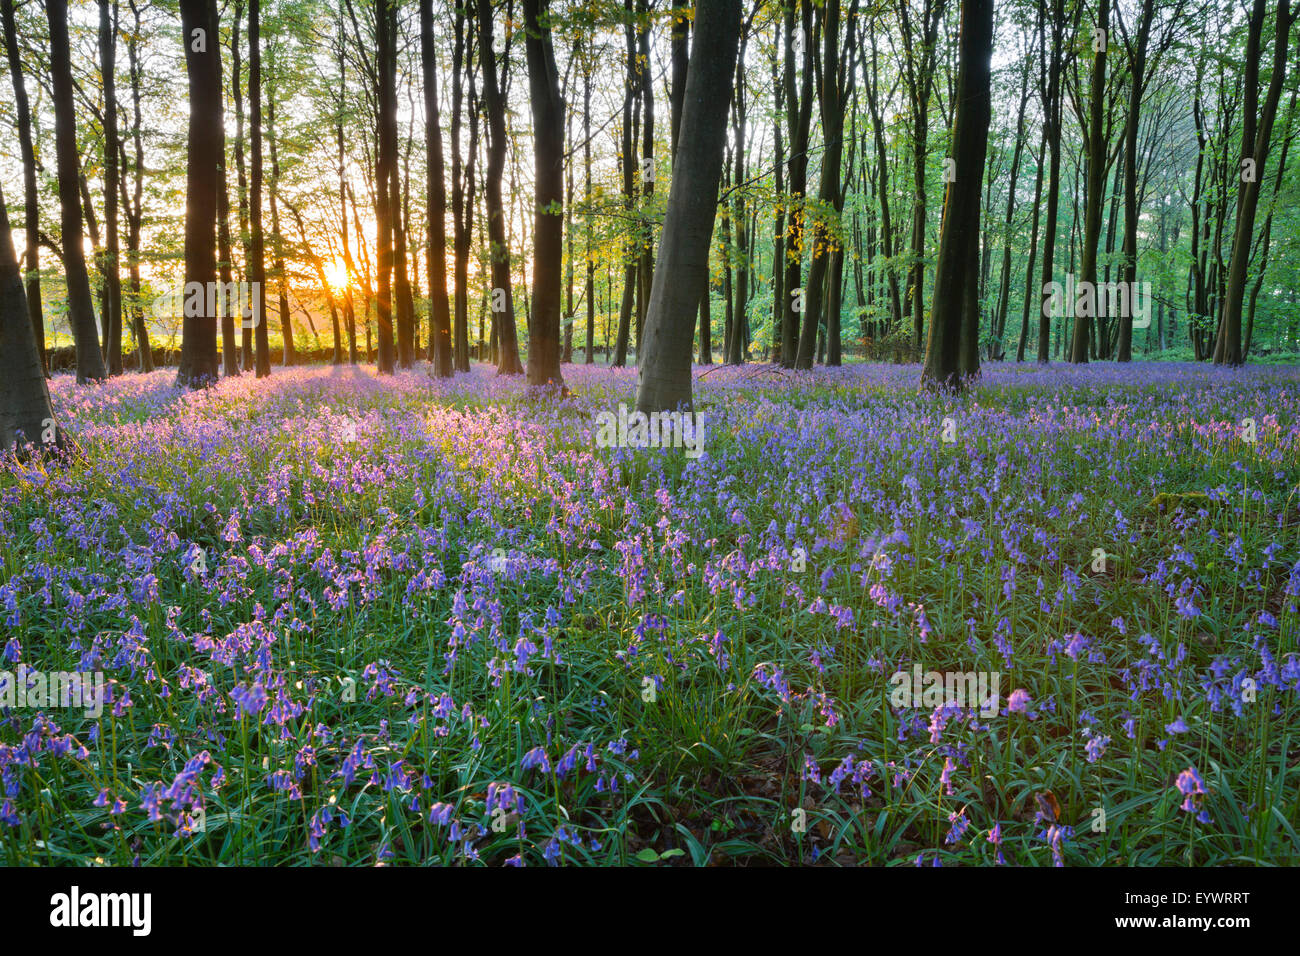 Bluebell wood, Stow-on-the-Wold, Cotswolds, Gloucestershire, Inglaterra, Reino Unido, Europa Foto de stock